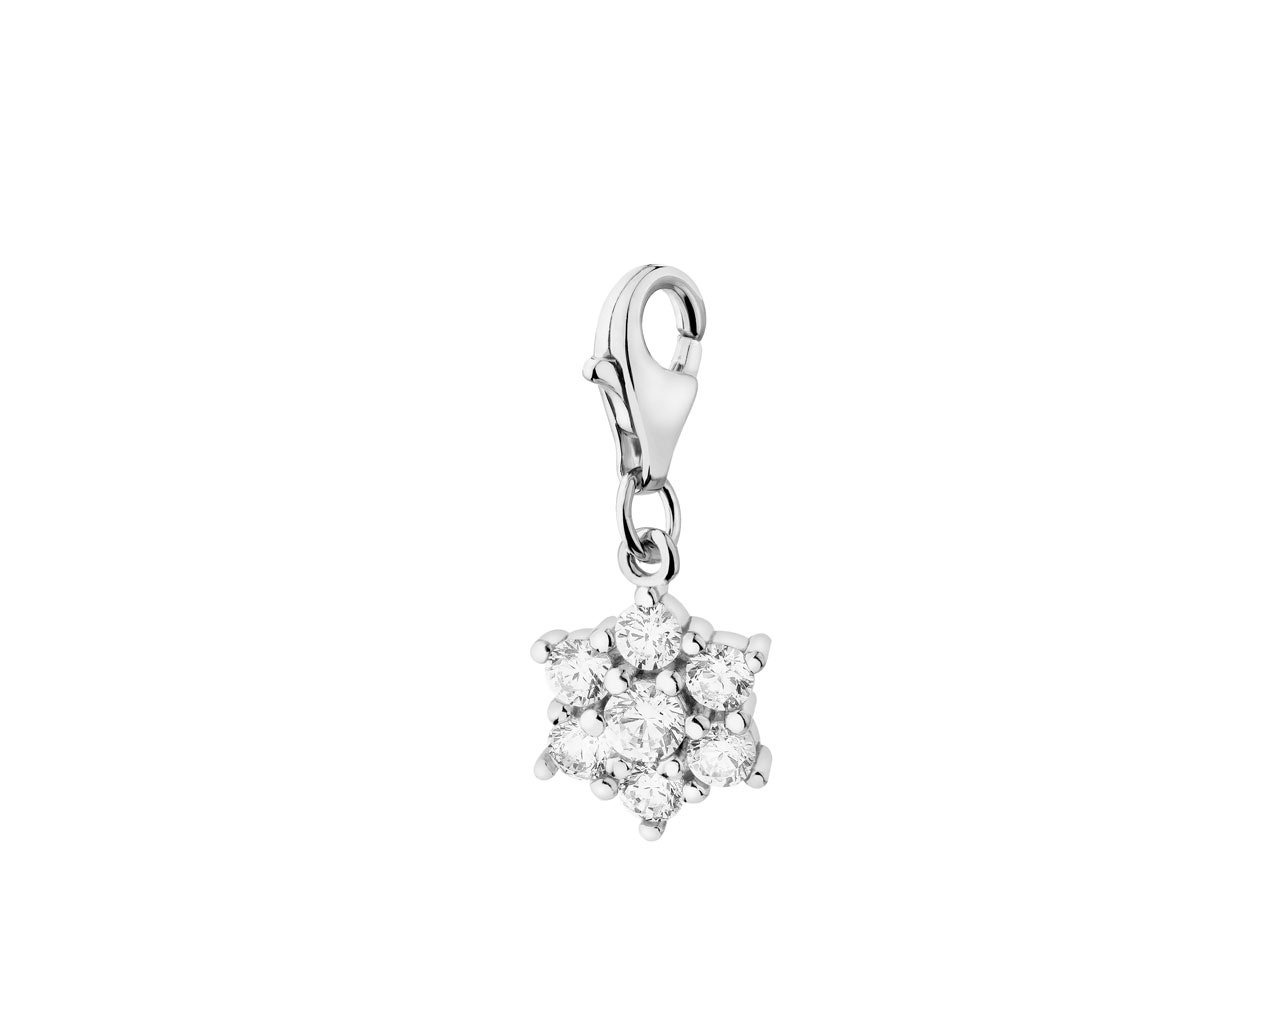 Silver charm with cubic zirconia - flower